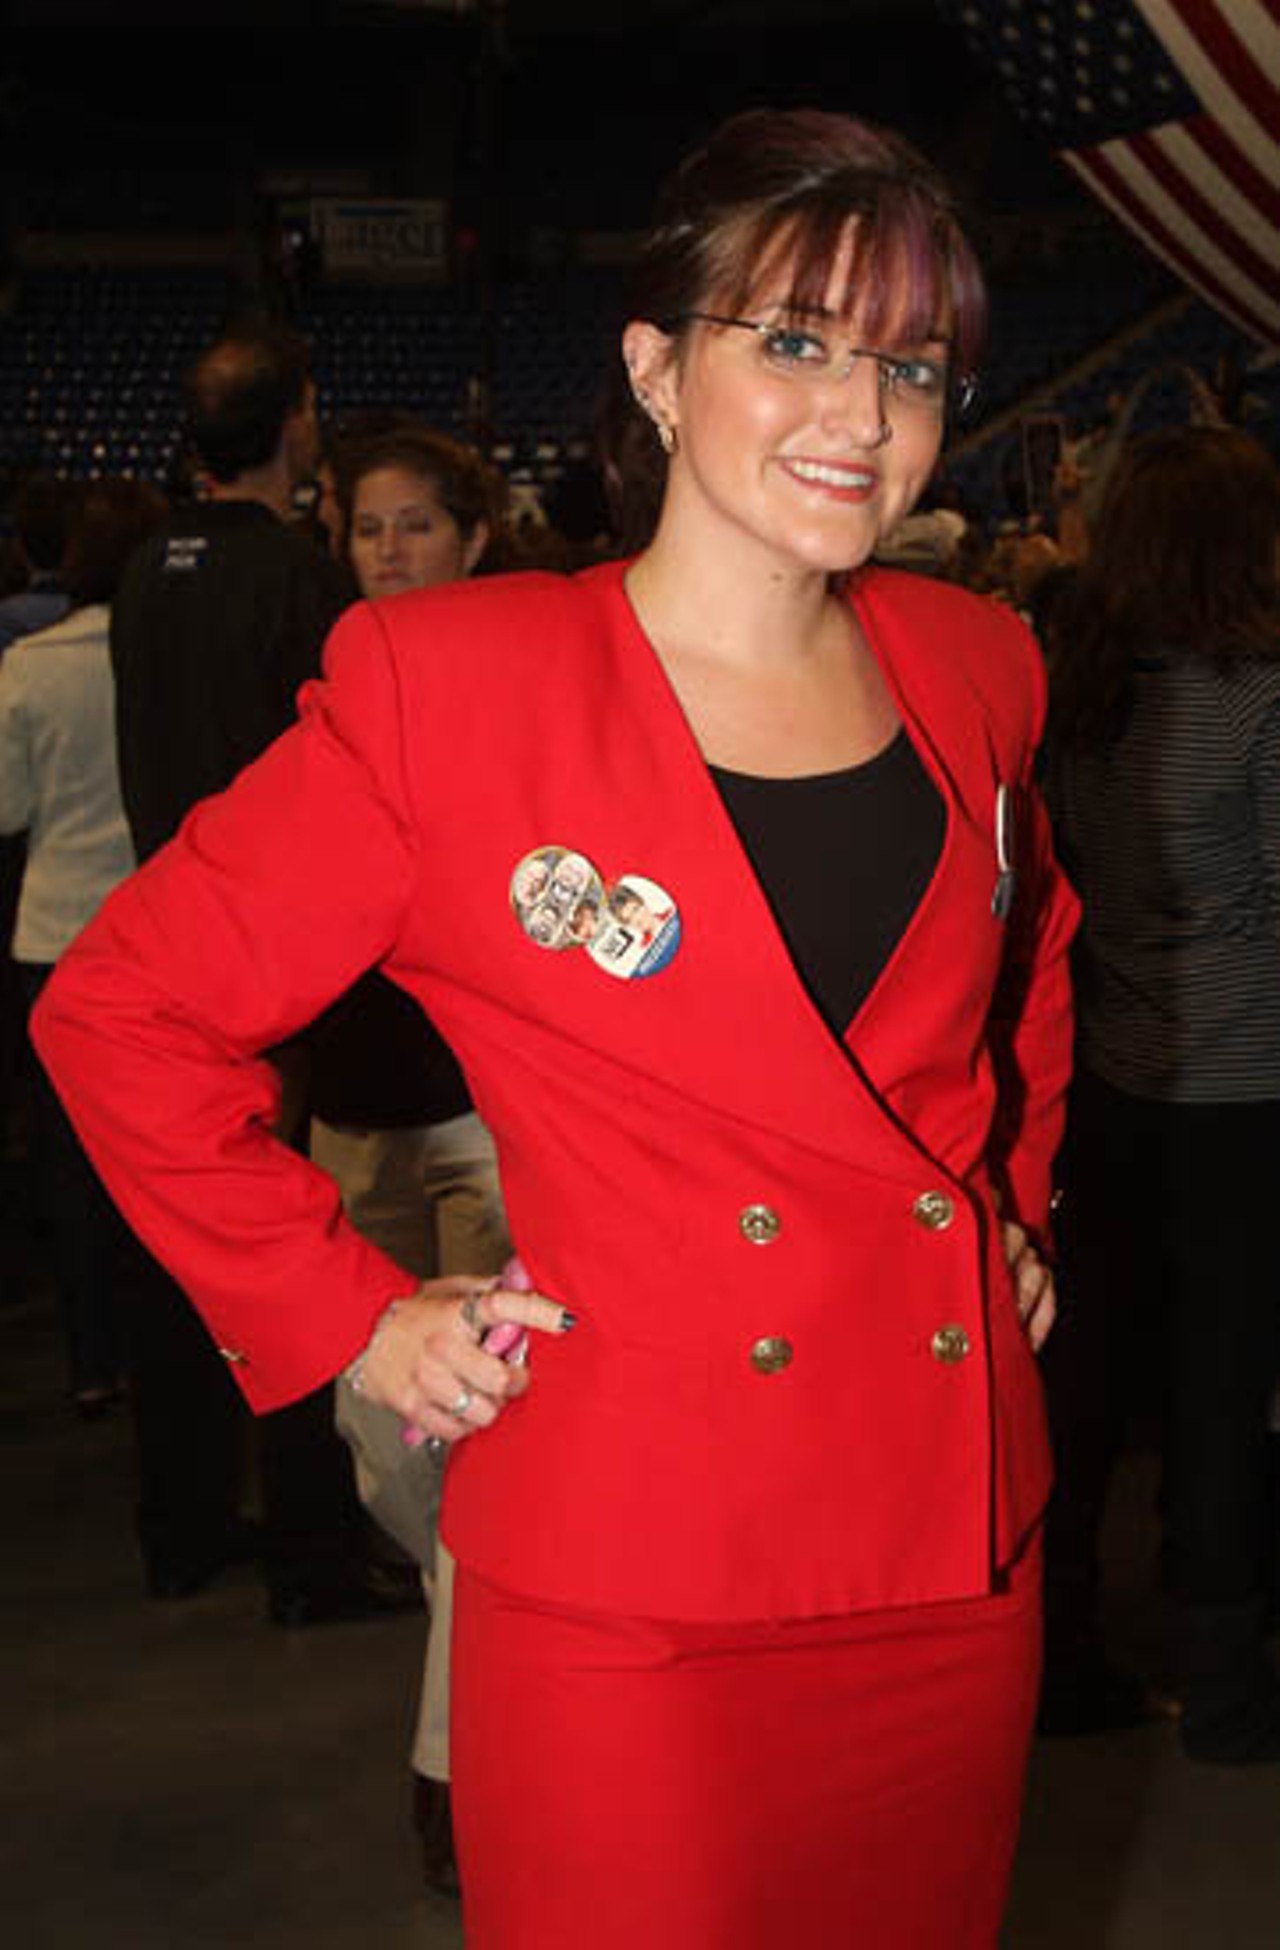 A Sarah Palin look-a-like, Katie Hughes, claims she&rsquo;s also from Alaska and currently attends Webster University.Get more coverage from St. Louis, including photos, blogs and video.